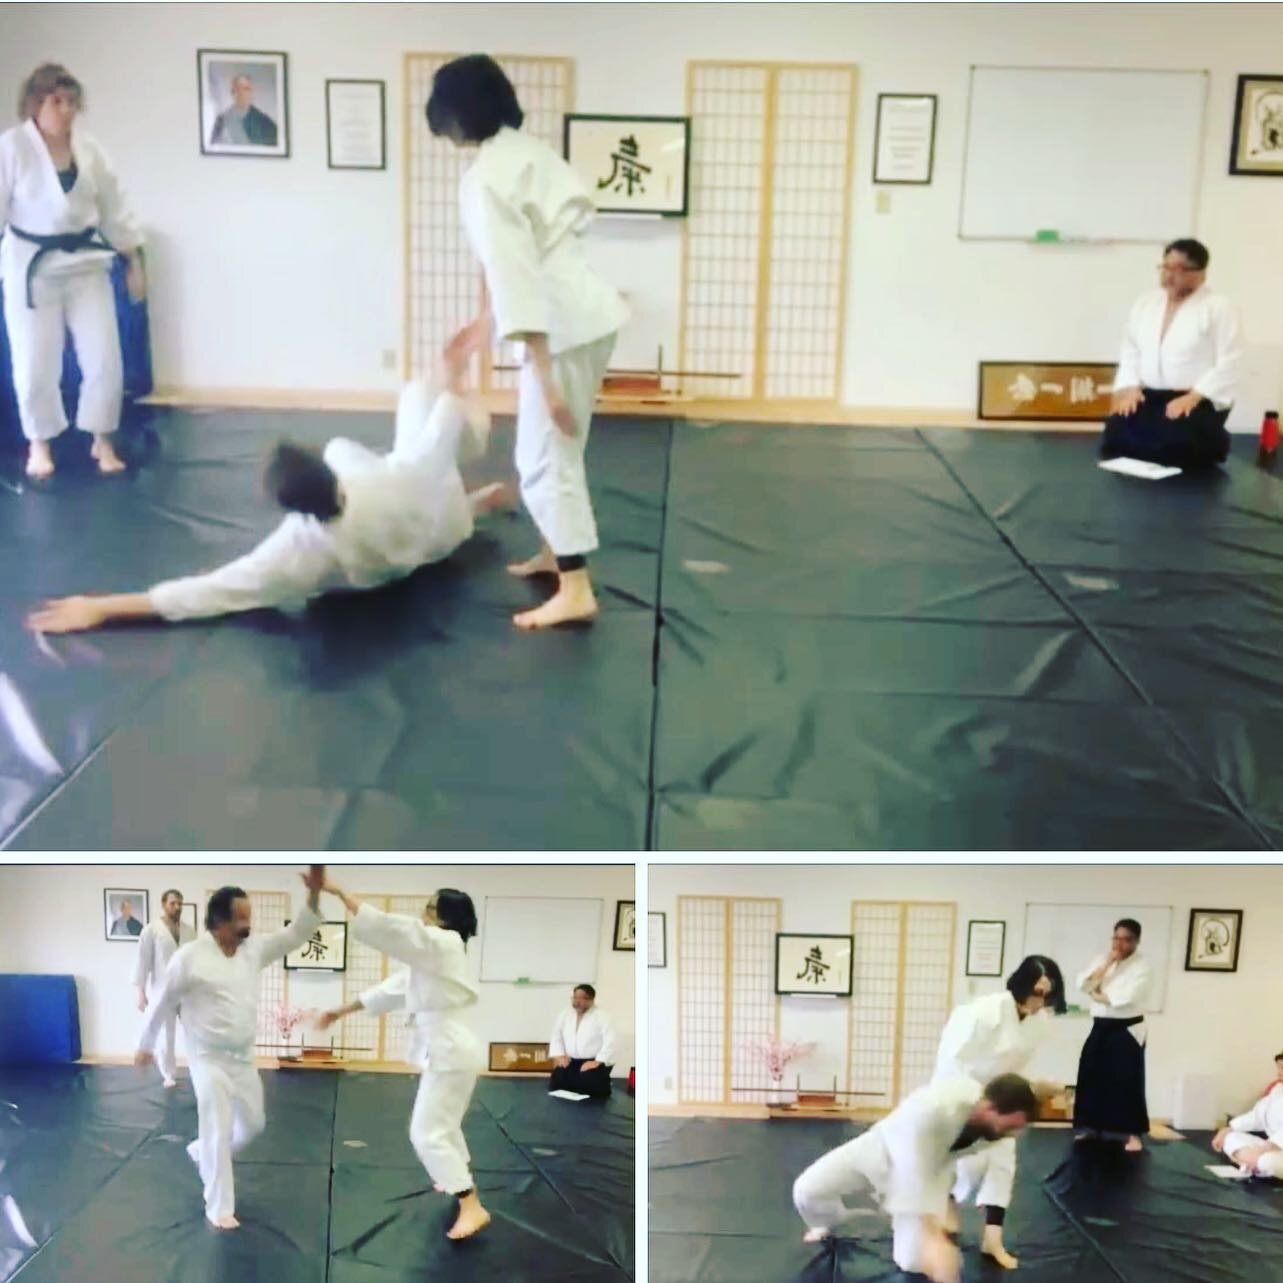 Congratulations Frances for an amazing 4th kyu (second) test. So good that we did *two* randori (multiple attacks). One pic is with them doing a forehead strike (shomenuchi) with 3 people. They handily smashed this level of training. Next dojo test i